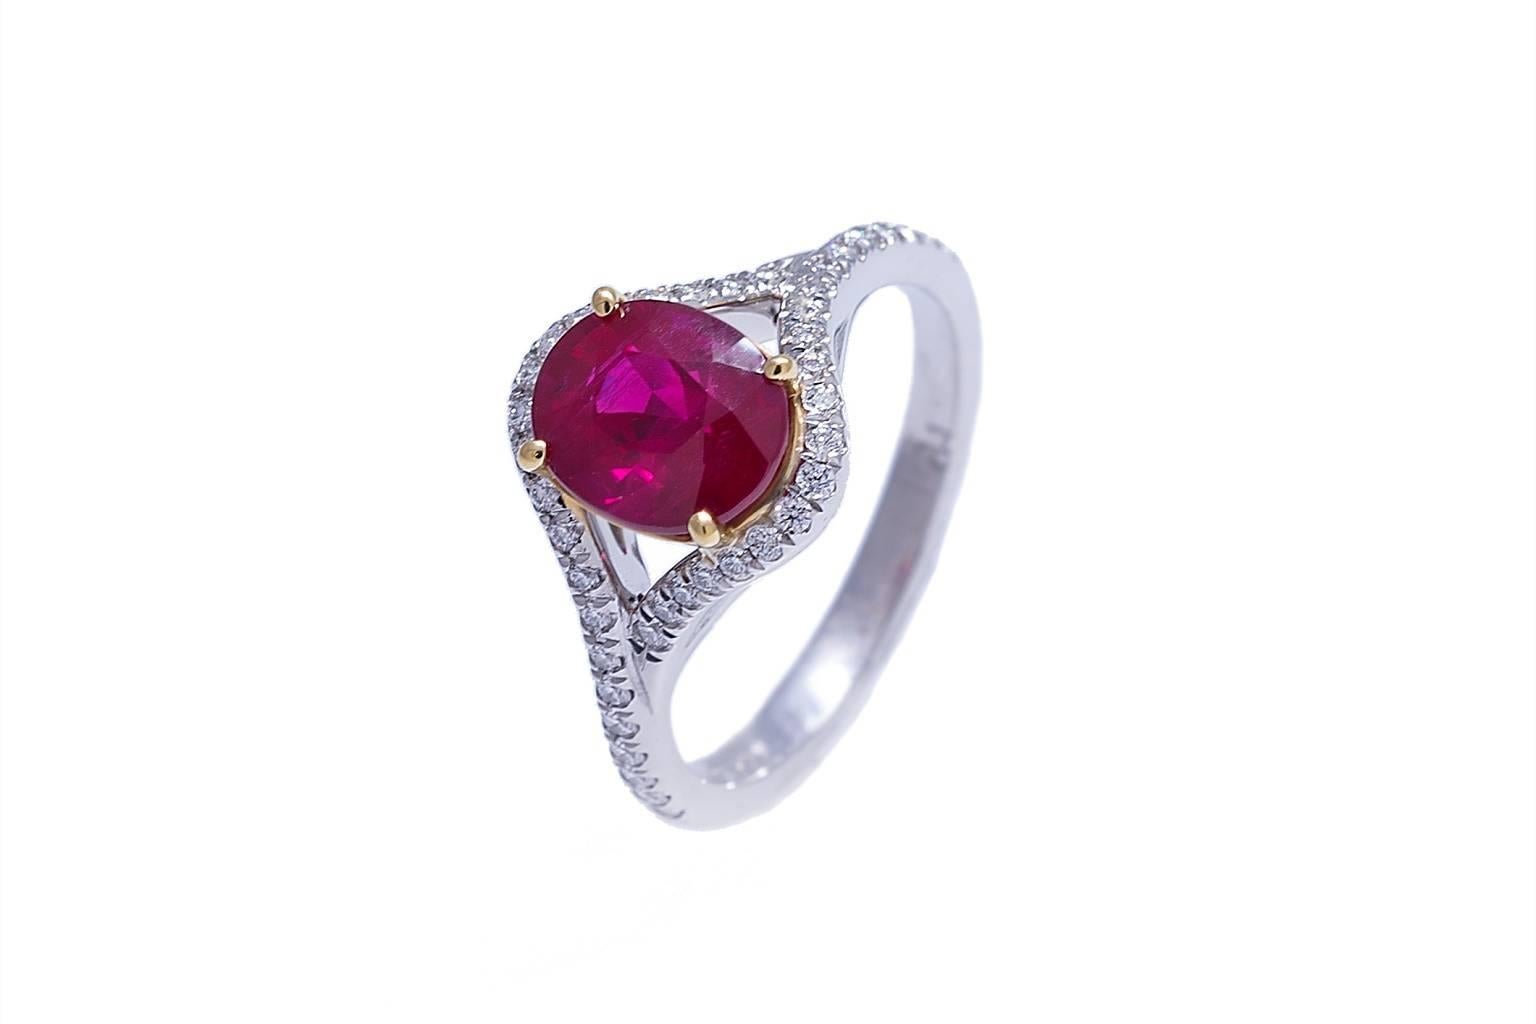 Platinum and 18K ring contains one oval ruby weighing 2.20 carats and forty-two diamonds weighing combined 0.24 carats. Size 6. Can be sized.
